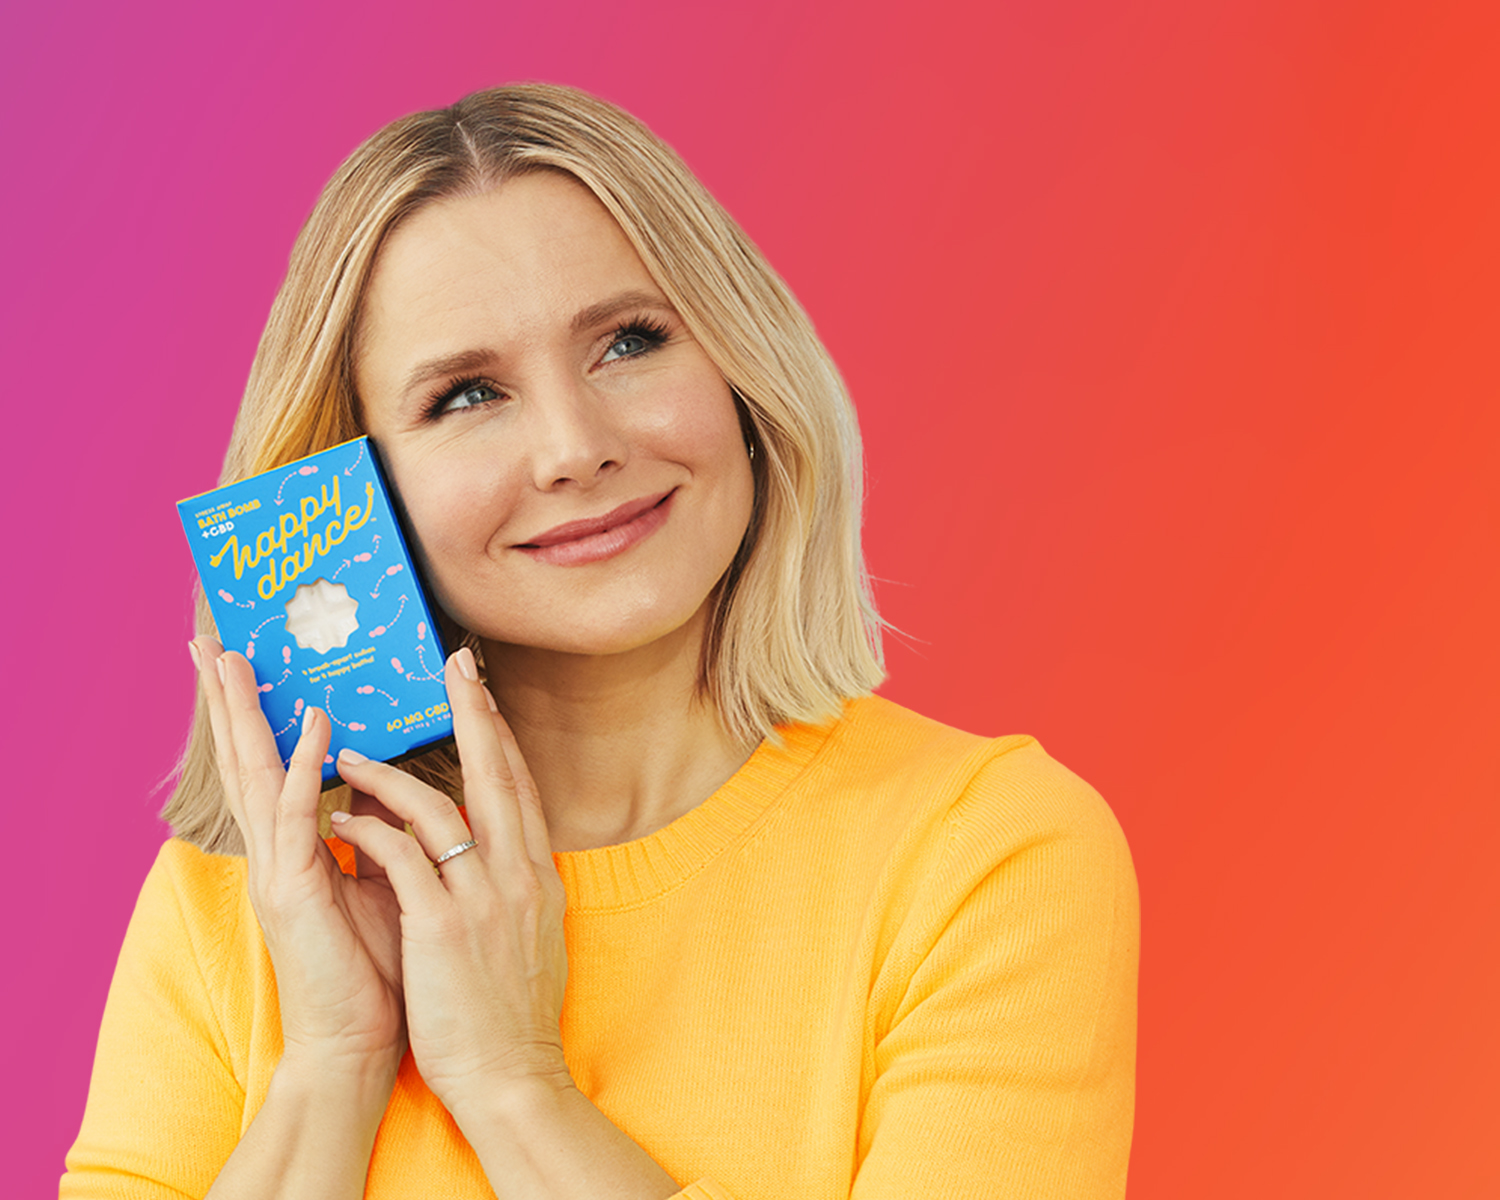 Kristen Bell’s CBD skin-care brand Happy Dance shutters, as it turns out people just want to get high